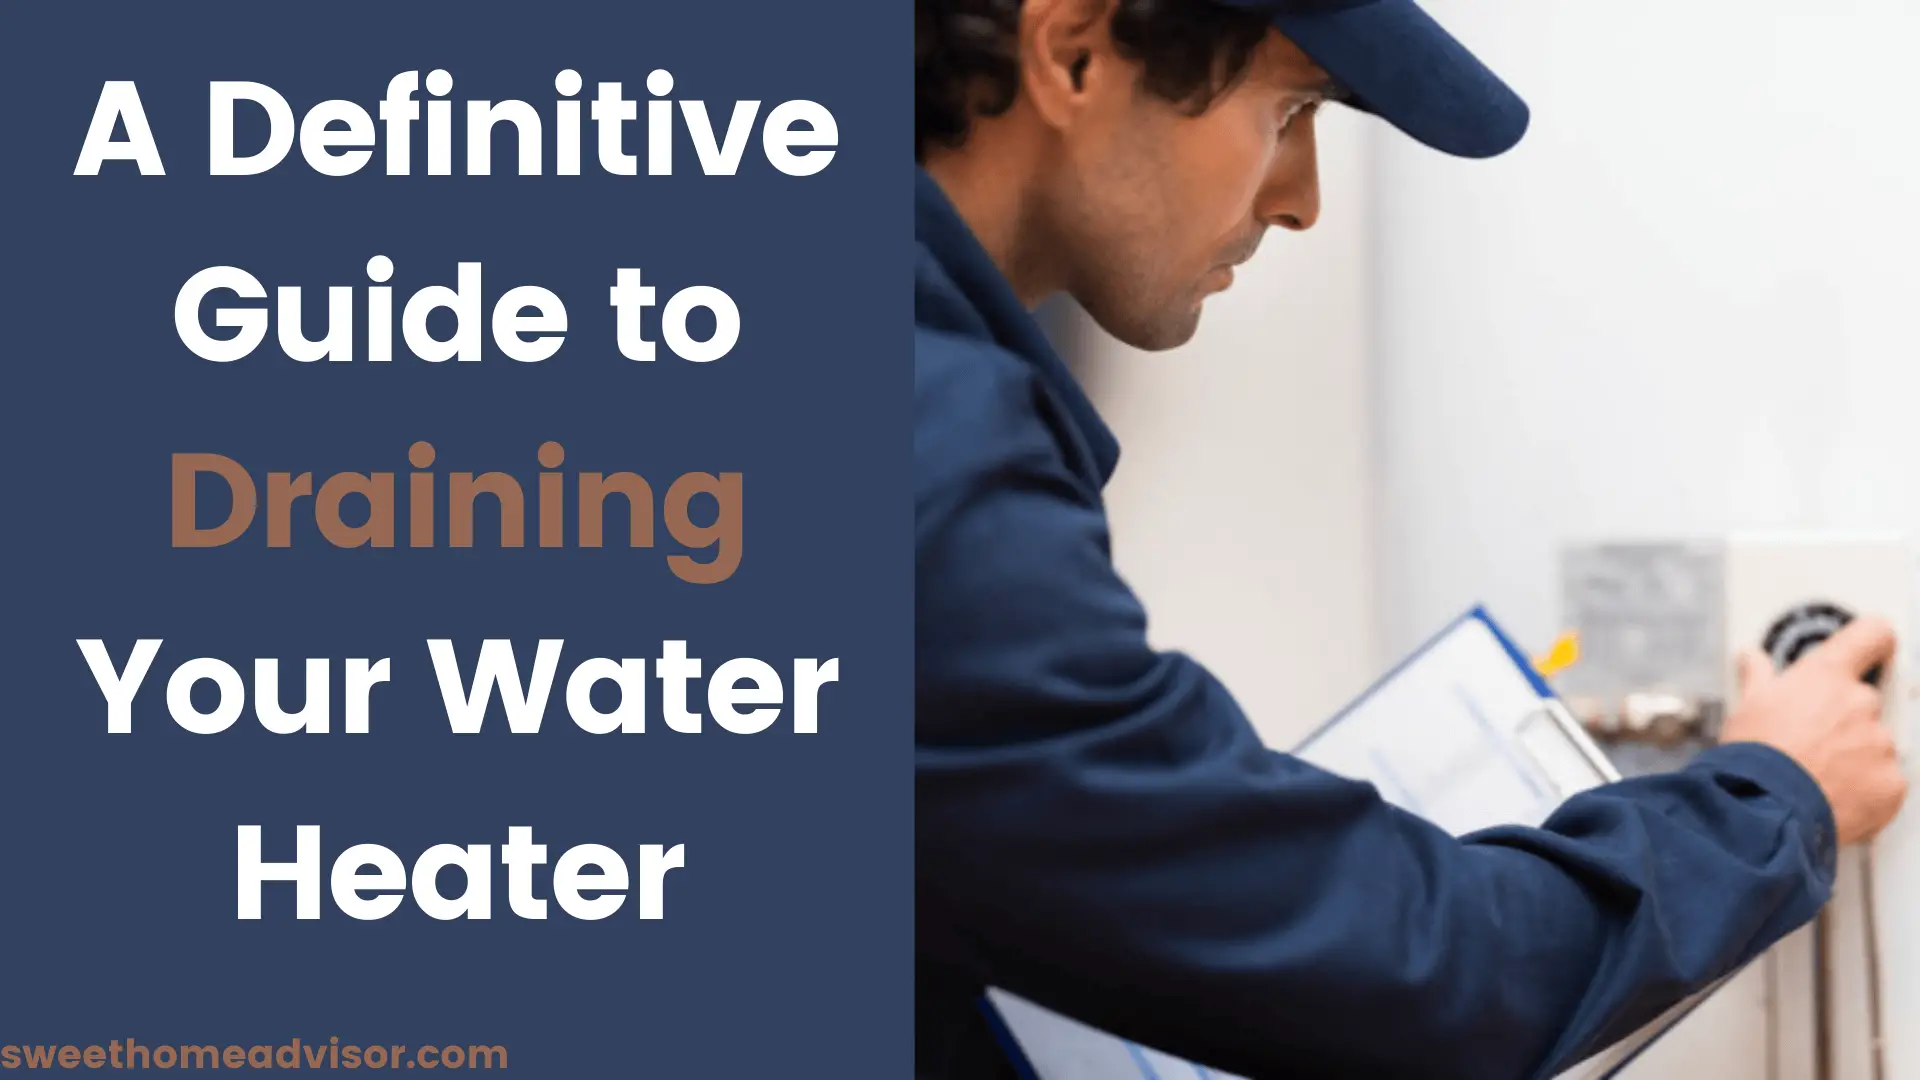 Guide to Draining Your Water Heater